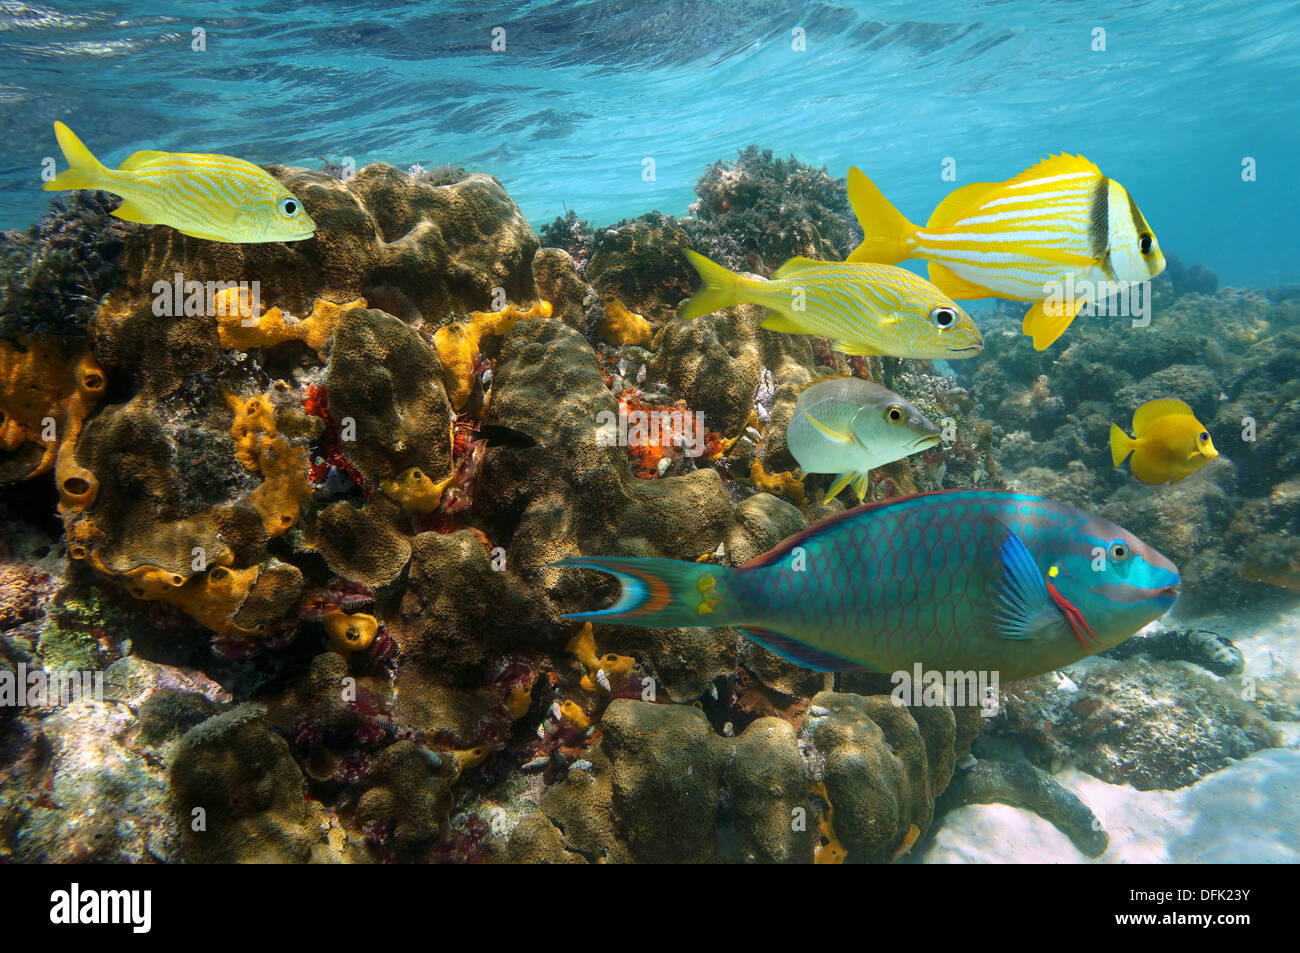 Undersea colors in a coral reef with colorful fish, Caribbean sea, Jamaica Stock Photo